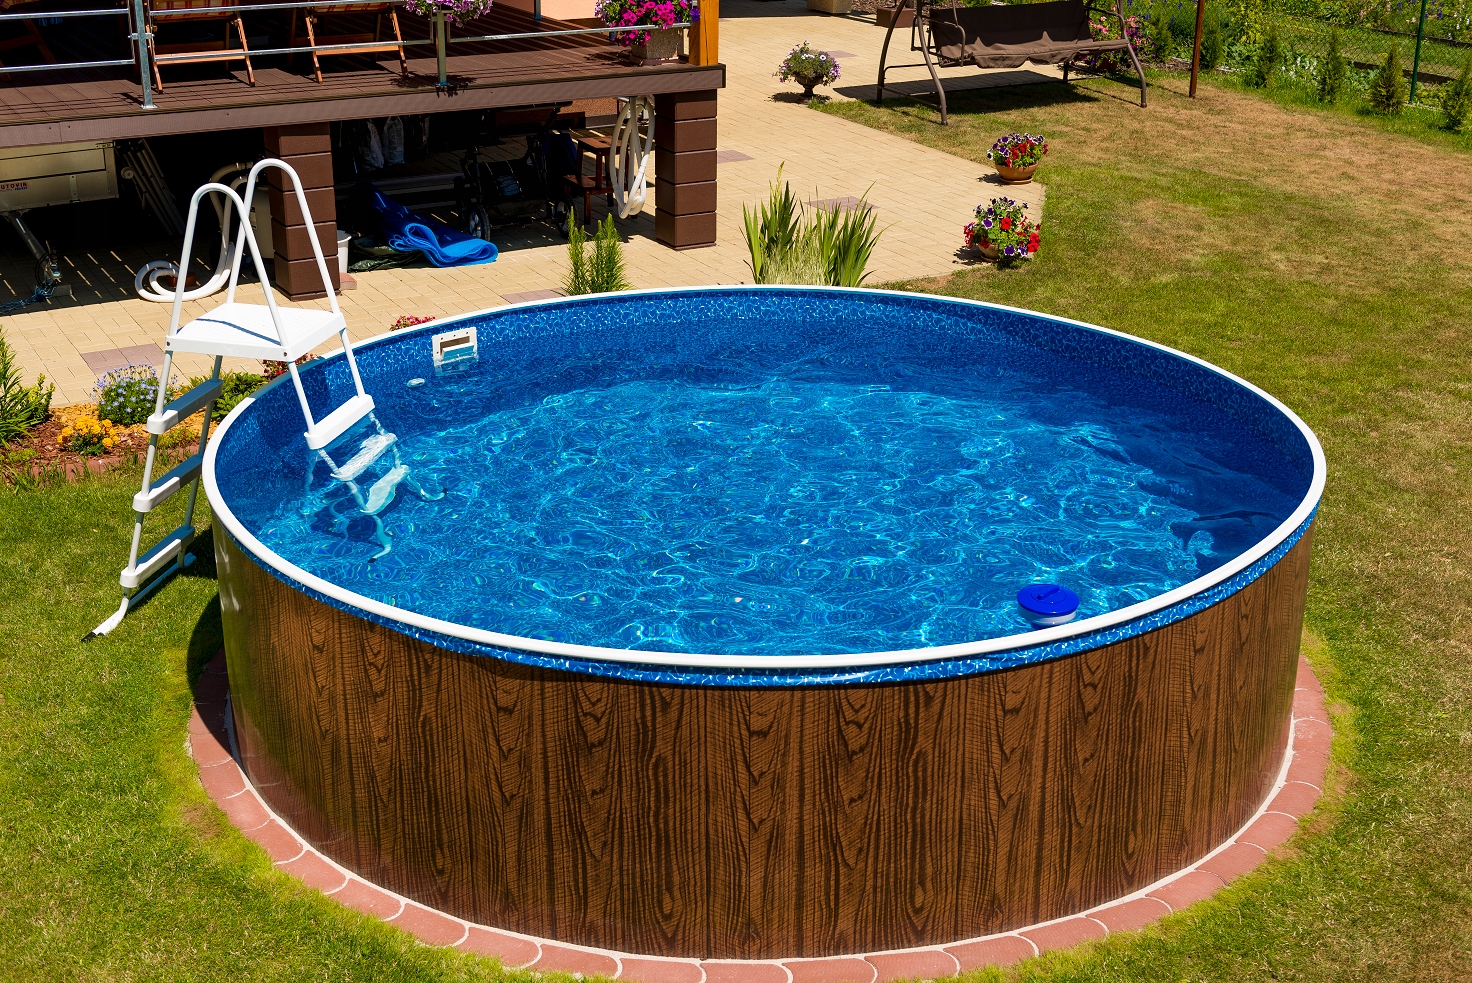 What are the types of above ground pools?